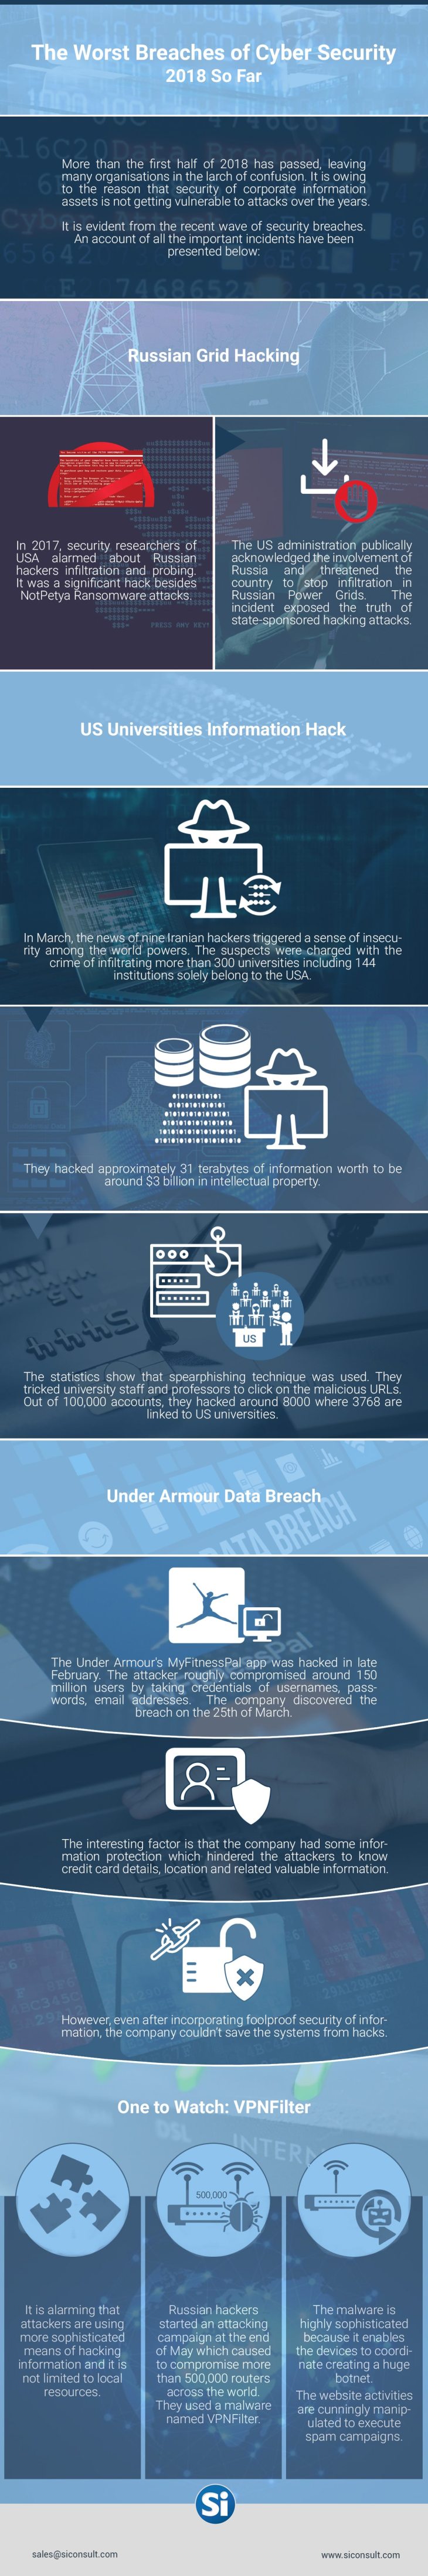 Cyber Security Breaches